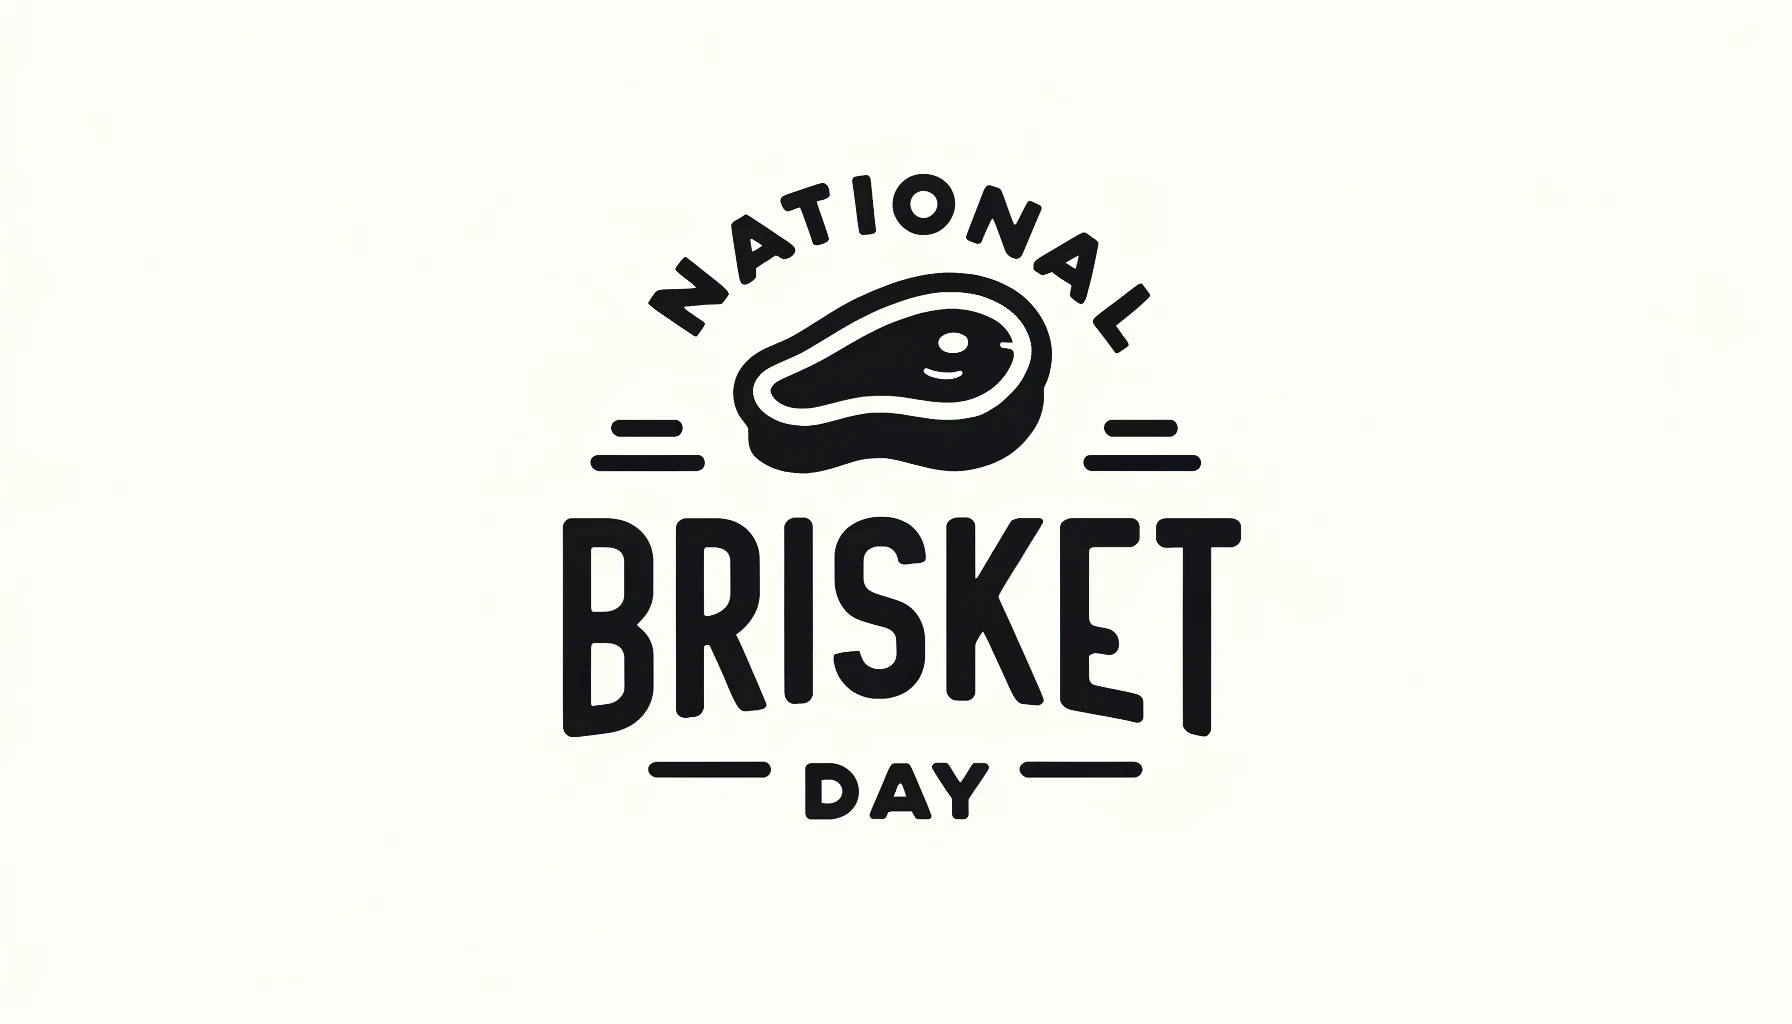 Savory Brisket Day Messages to Share